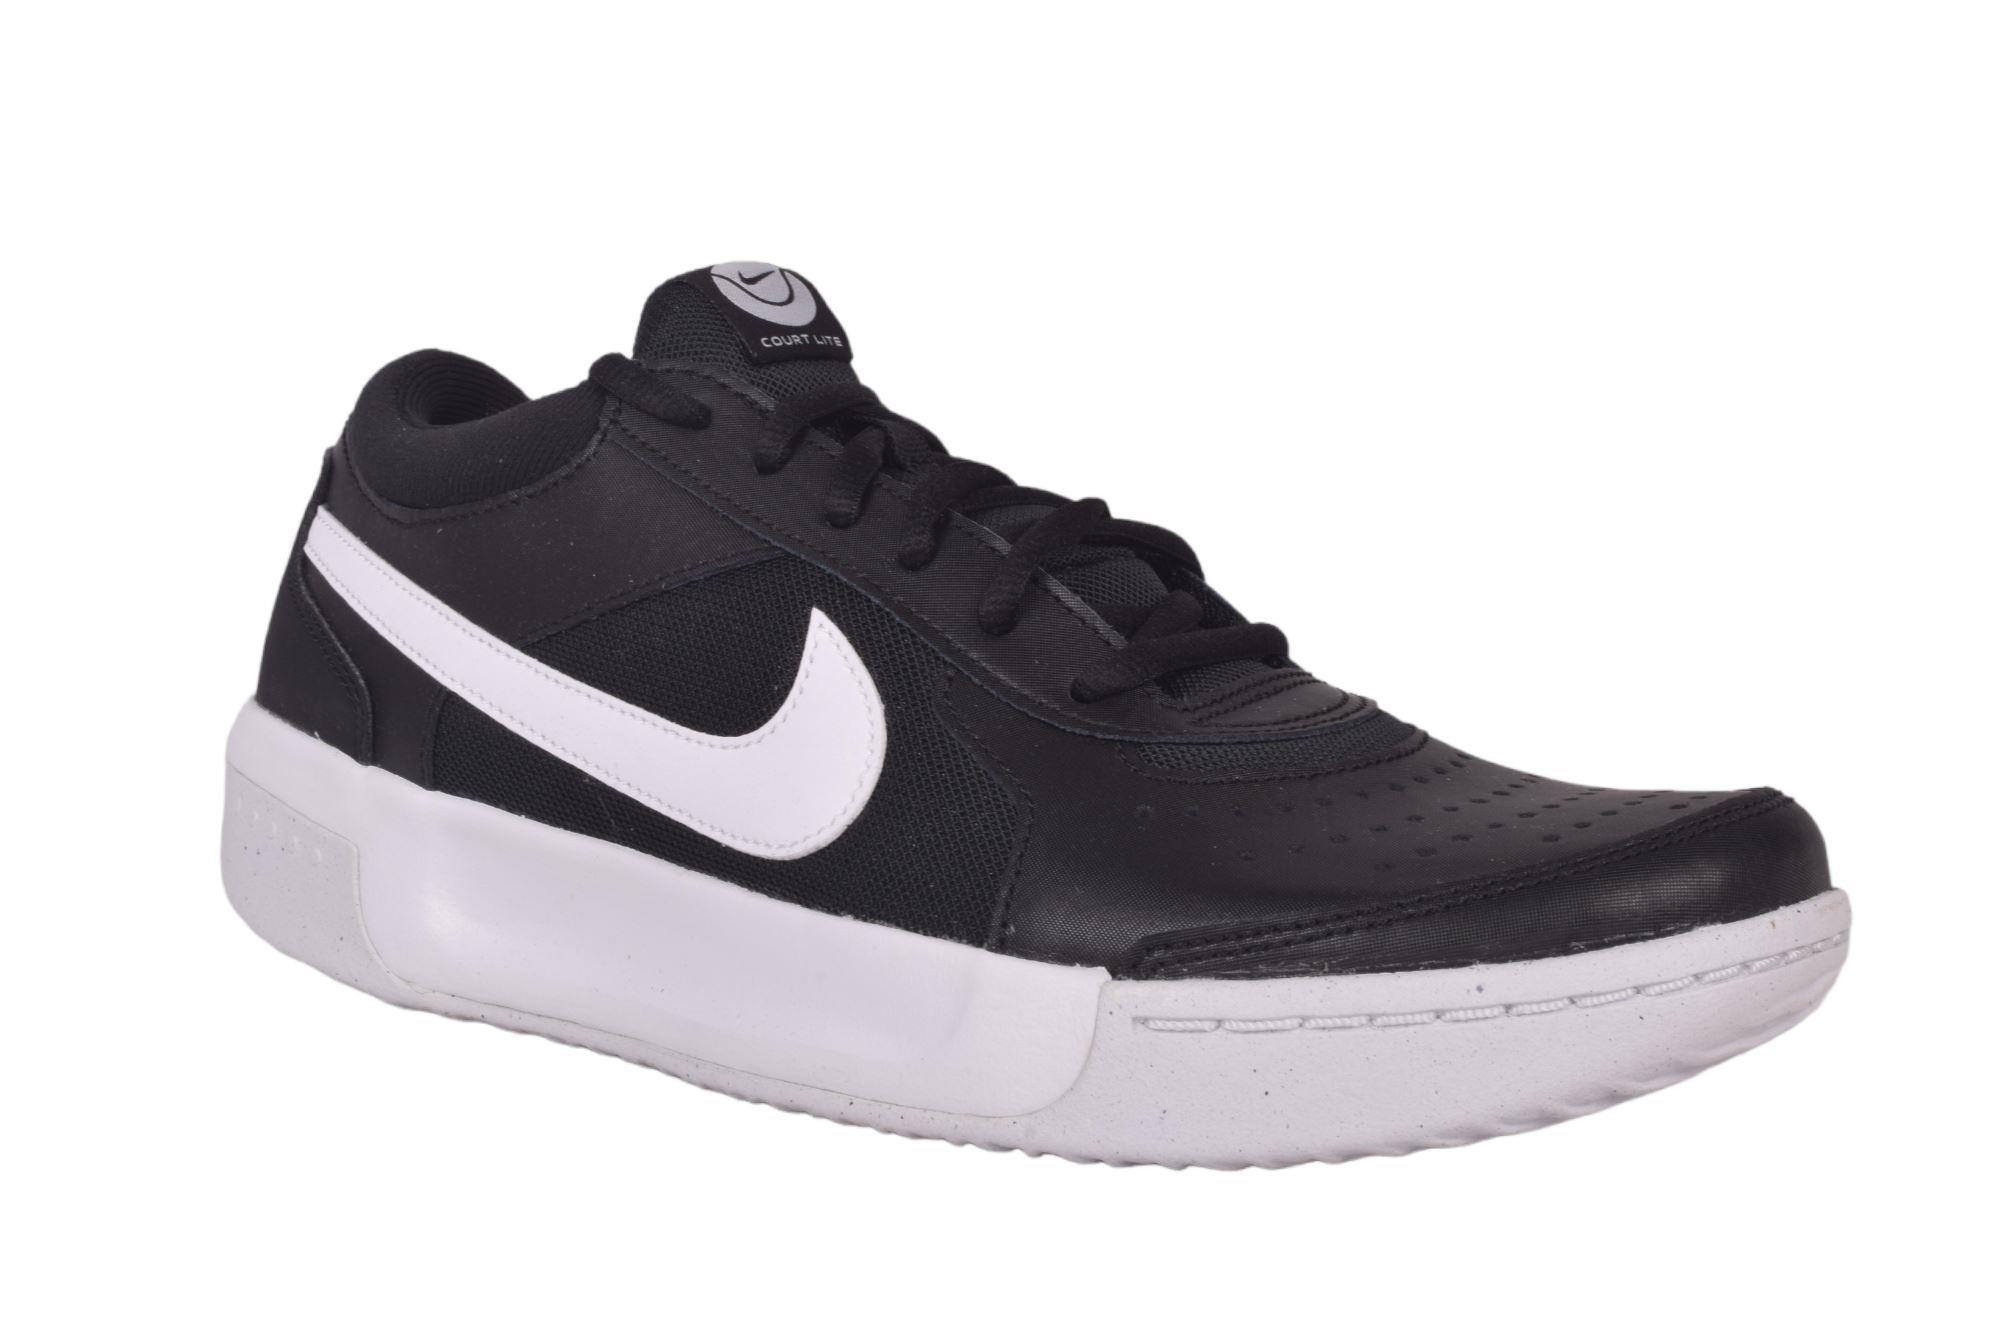 Nike BLACK/WHITE SNEAKERS Online Shopping PARMAR BOOT HOUSE Buy Footwear For Men, Women and Kids